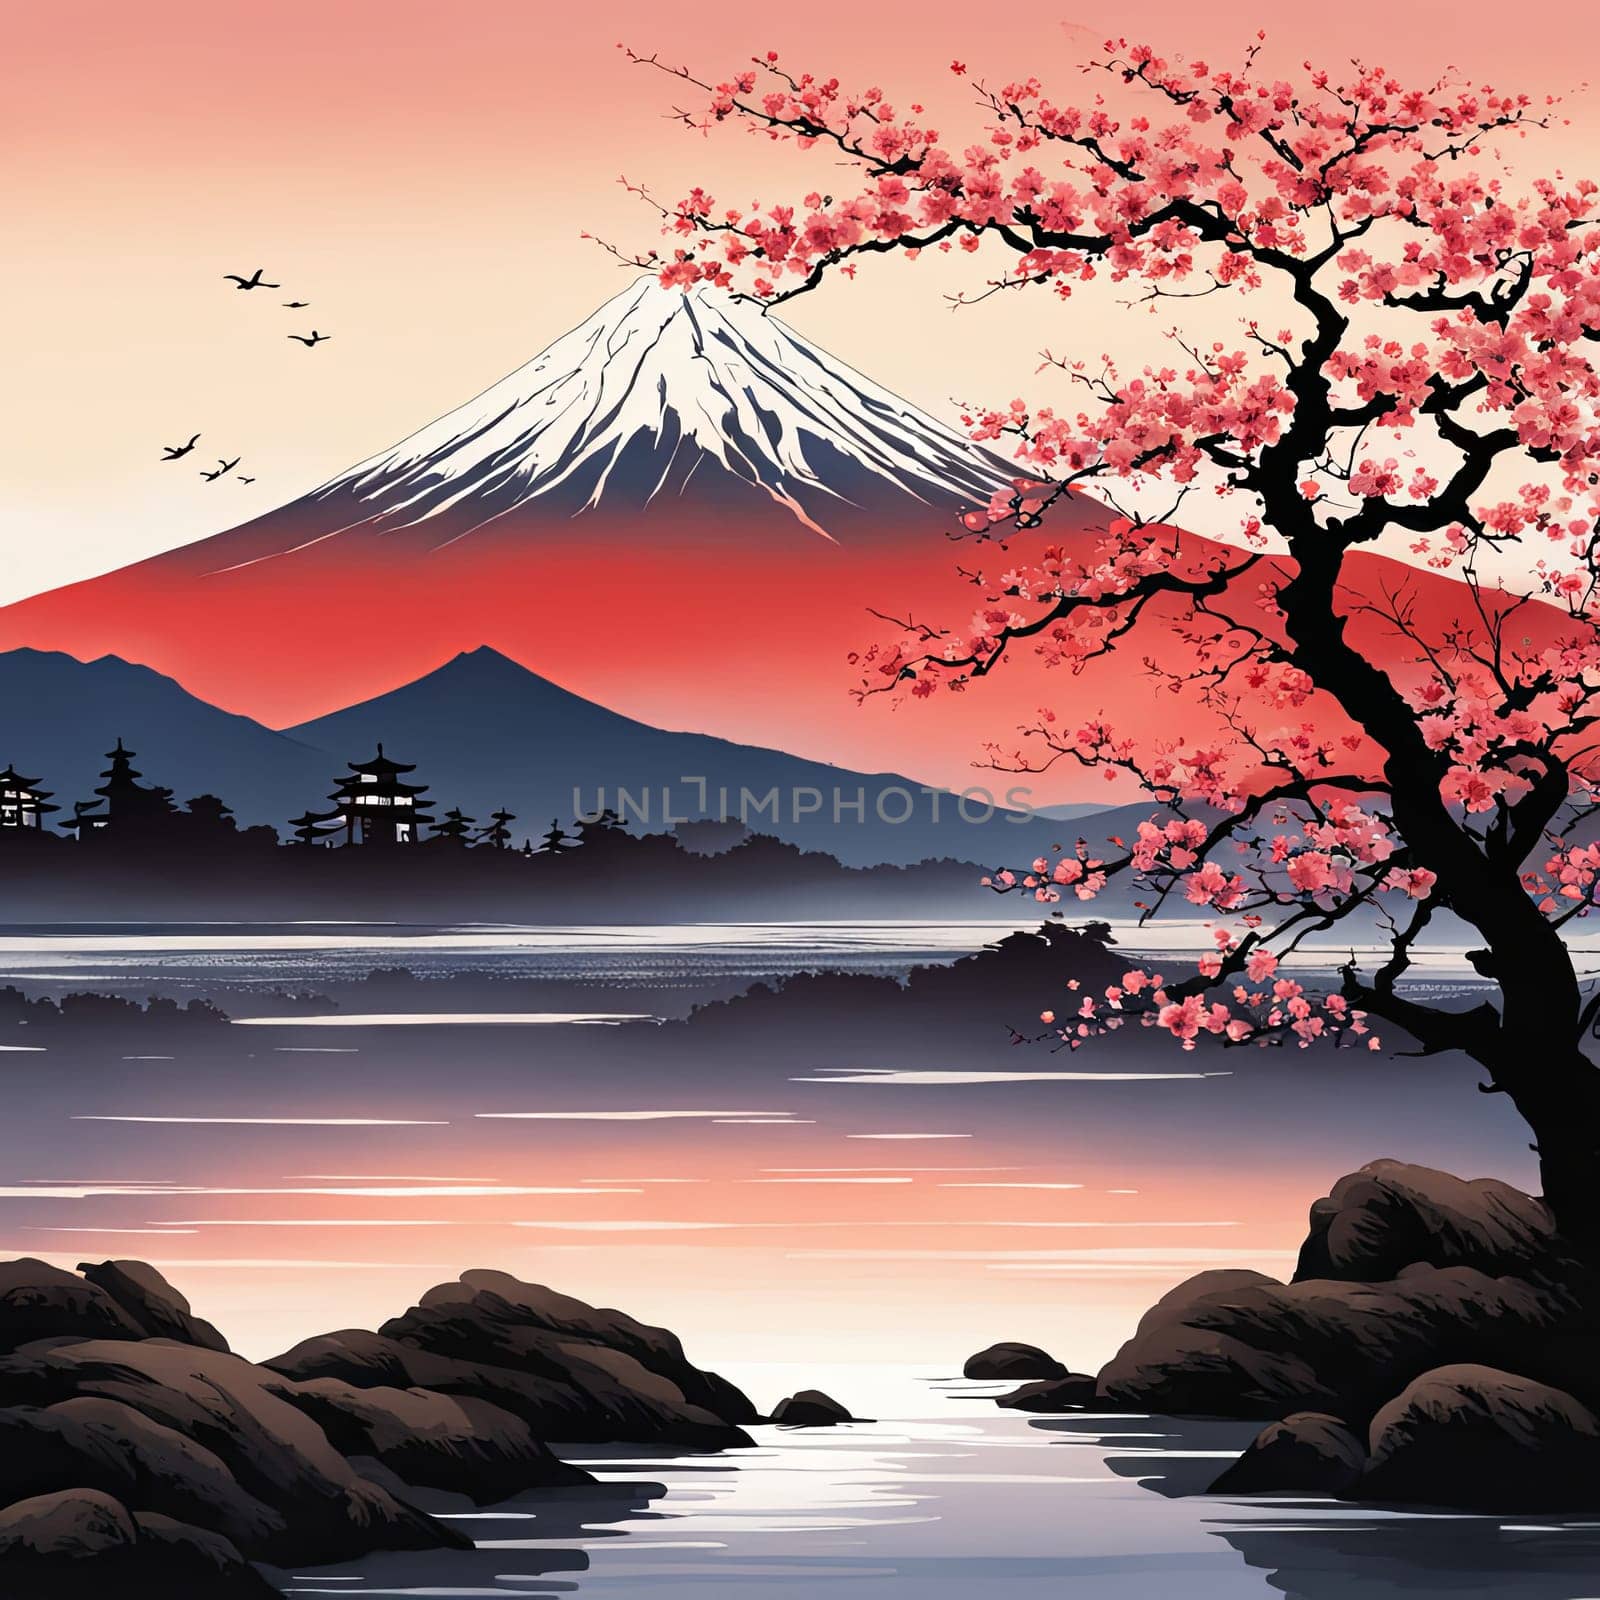 Mount Fuji at sunset, capturing majestic silhouette of mountain against vibrant, colorful sky as sun dips below horizon, creating tranquil scene. For art, creative projects, fashion, style, magazines. by Angelsmoon